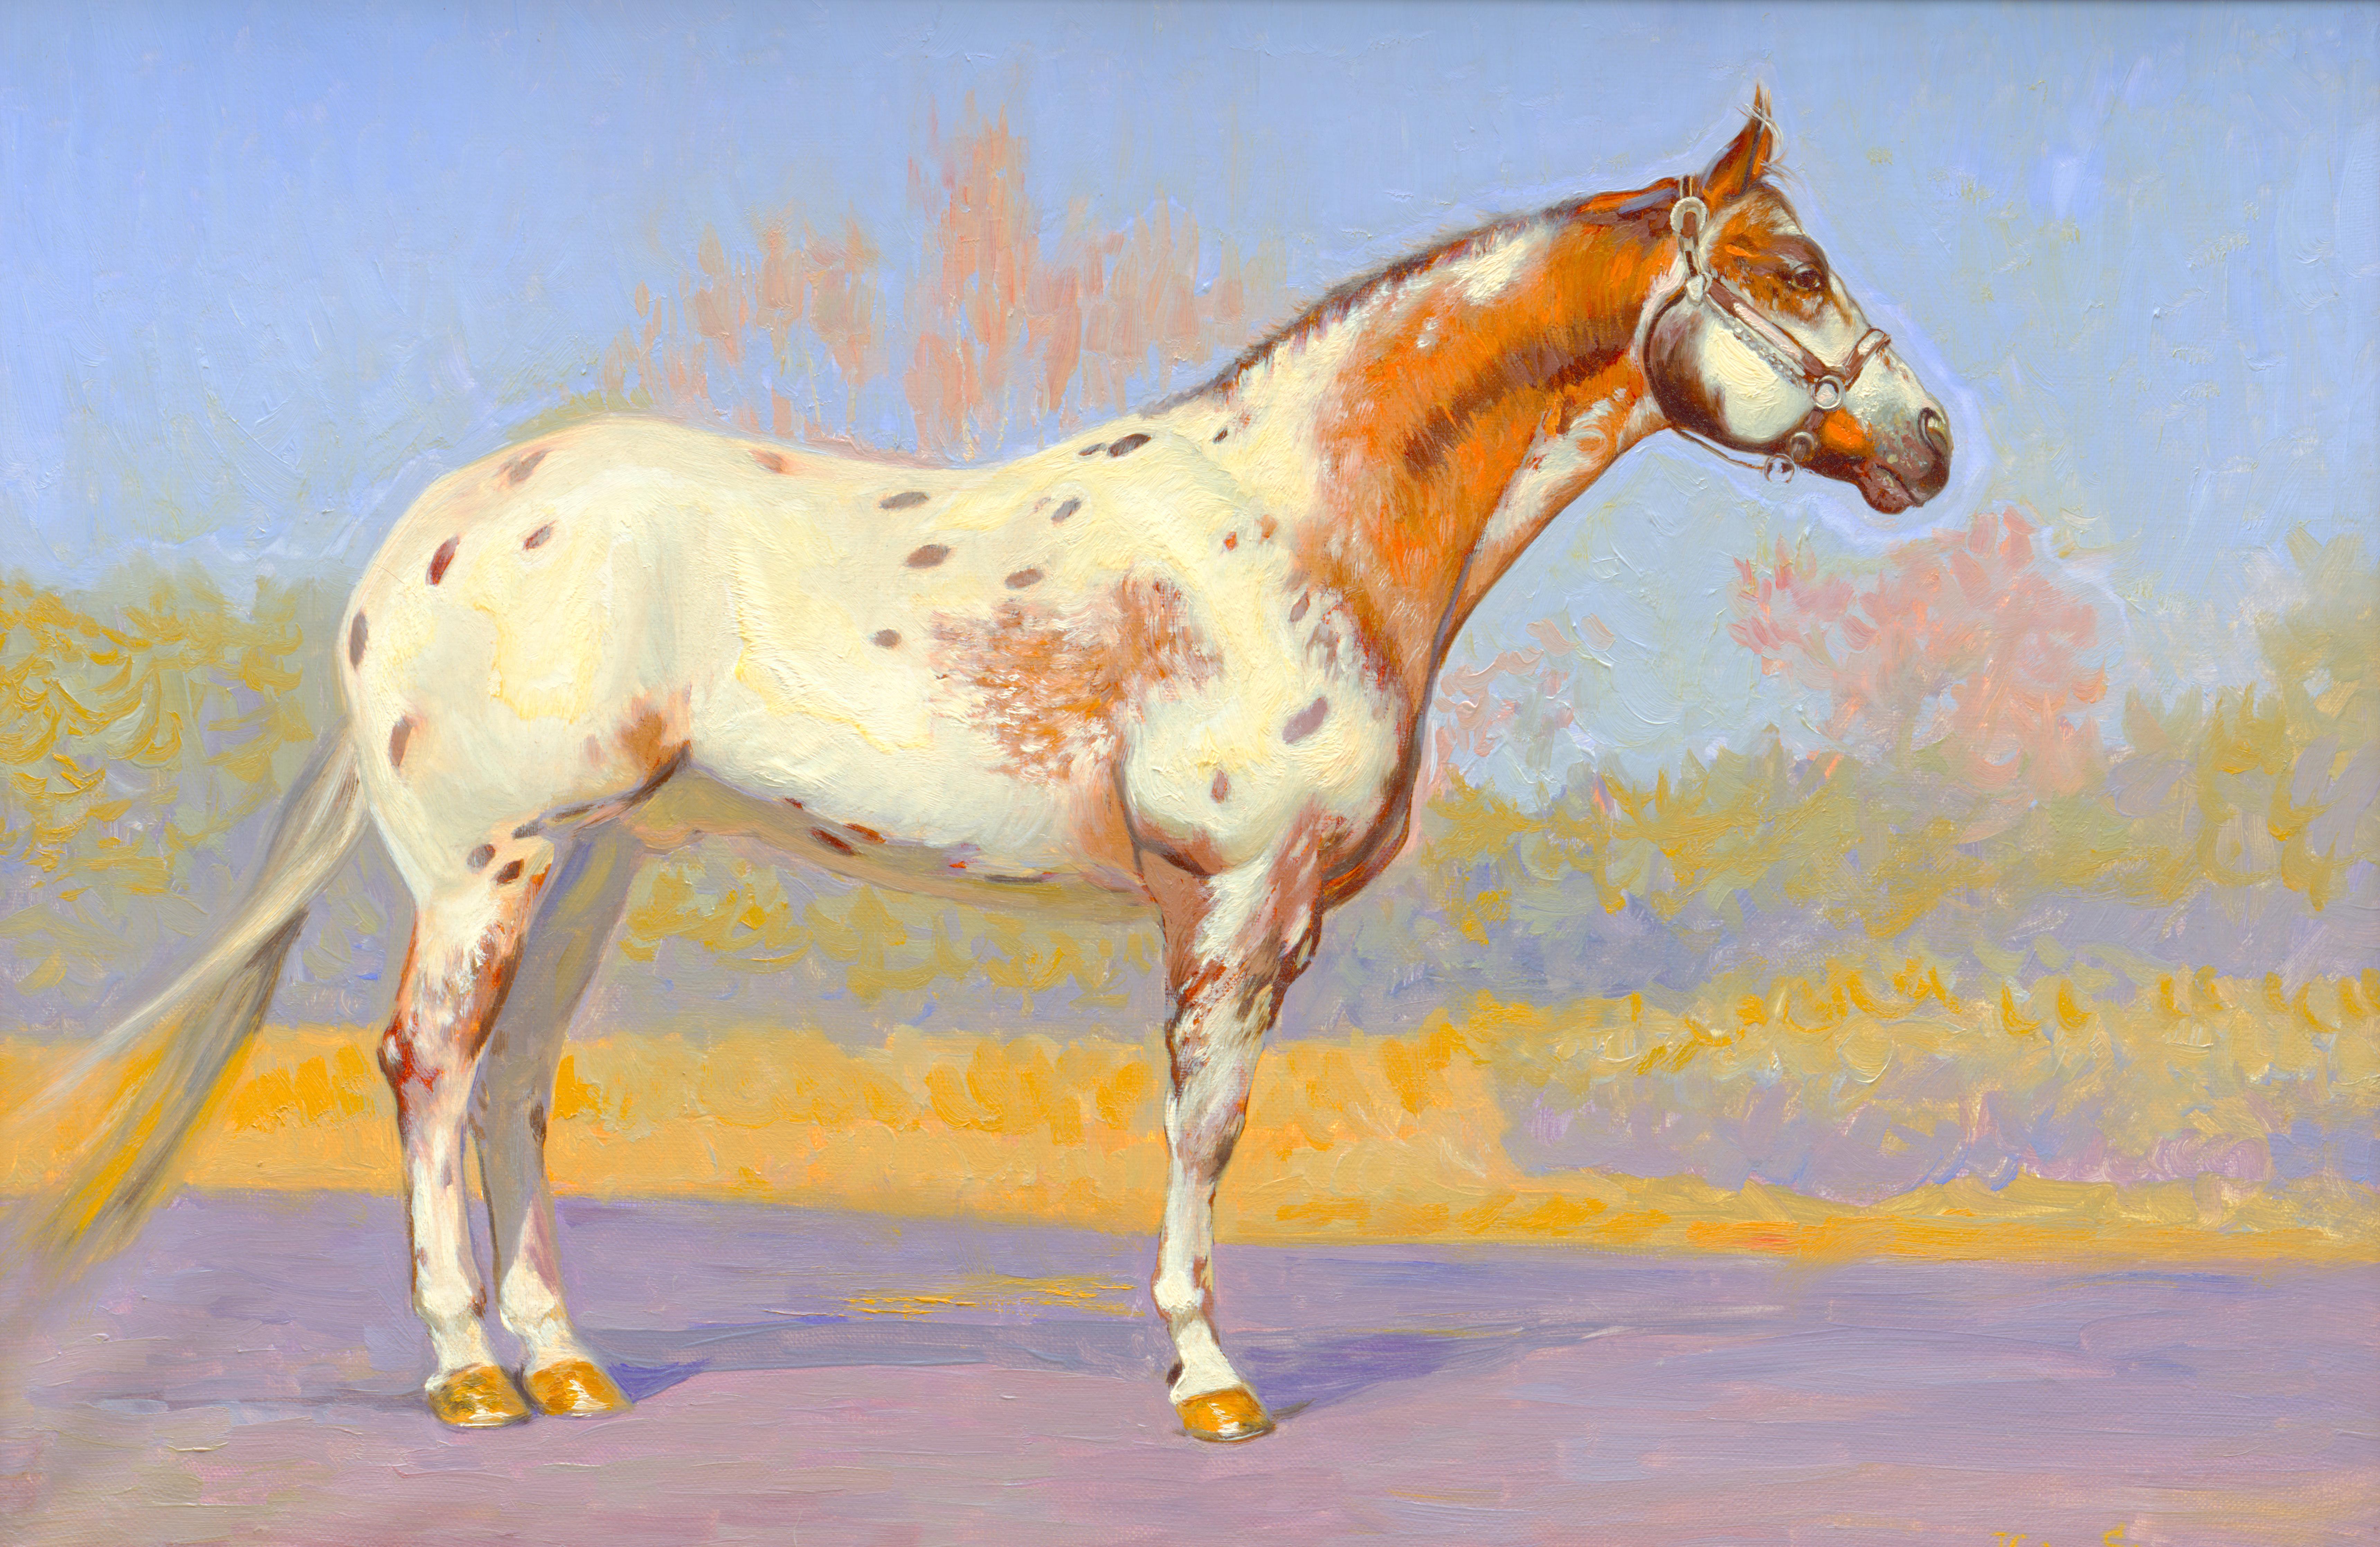 Appaloosa Horse Oil Painting Figurative Artwork by Russian painter 40x60